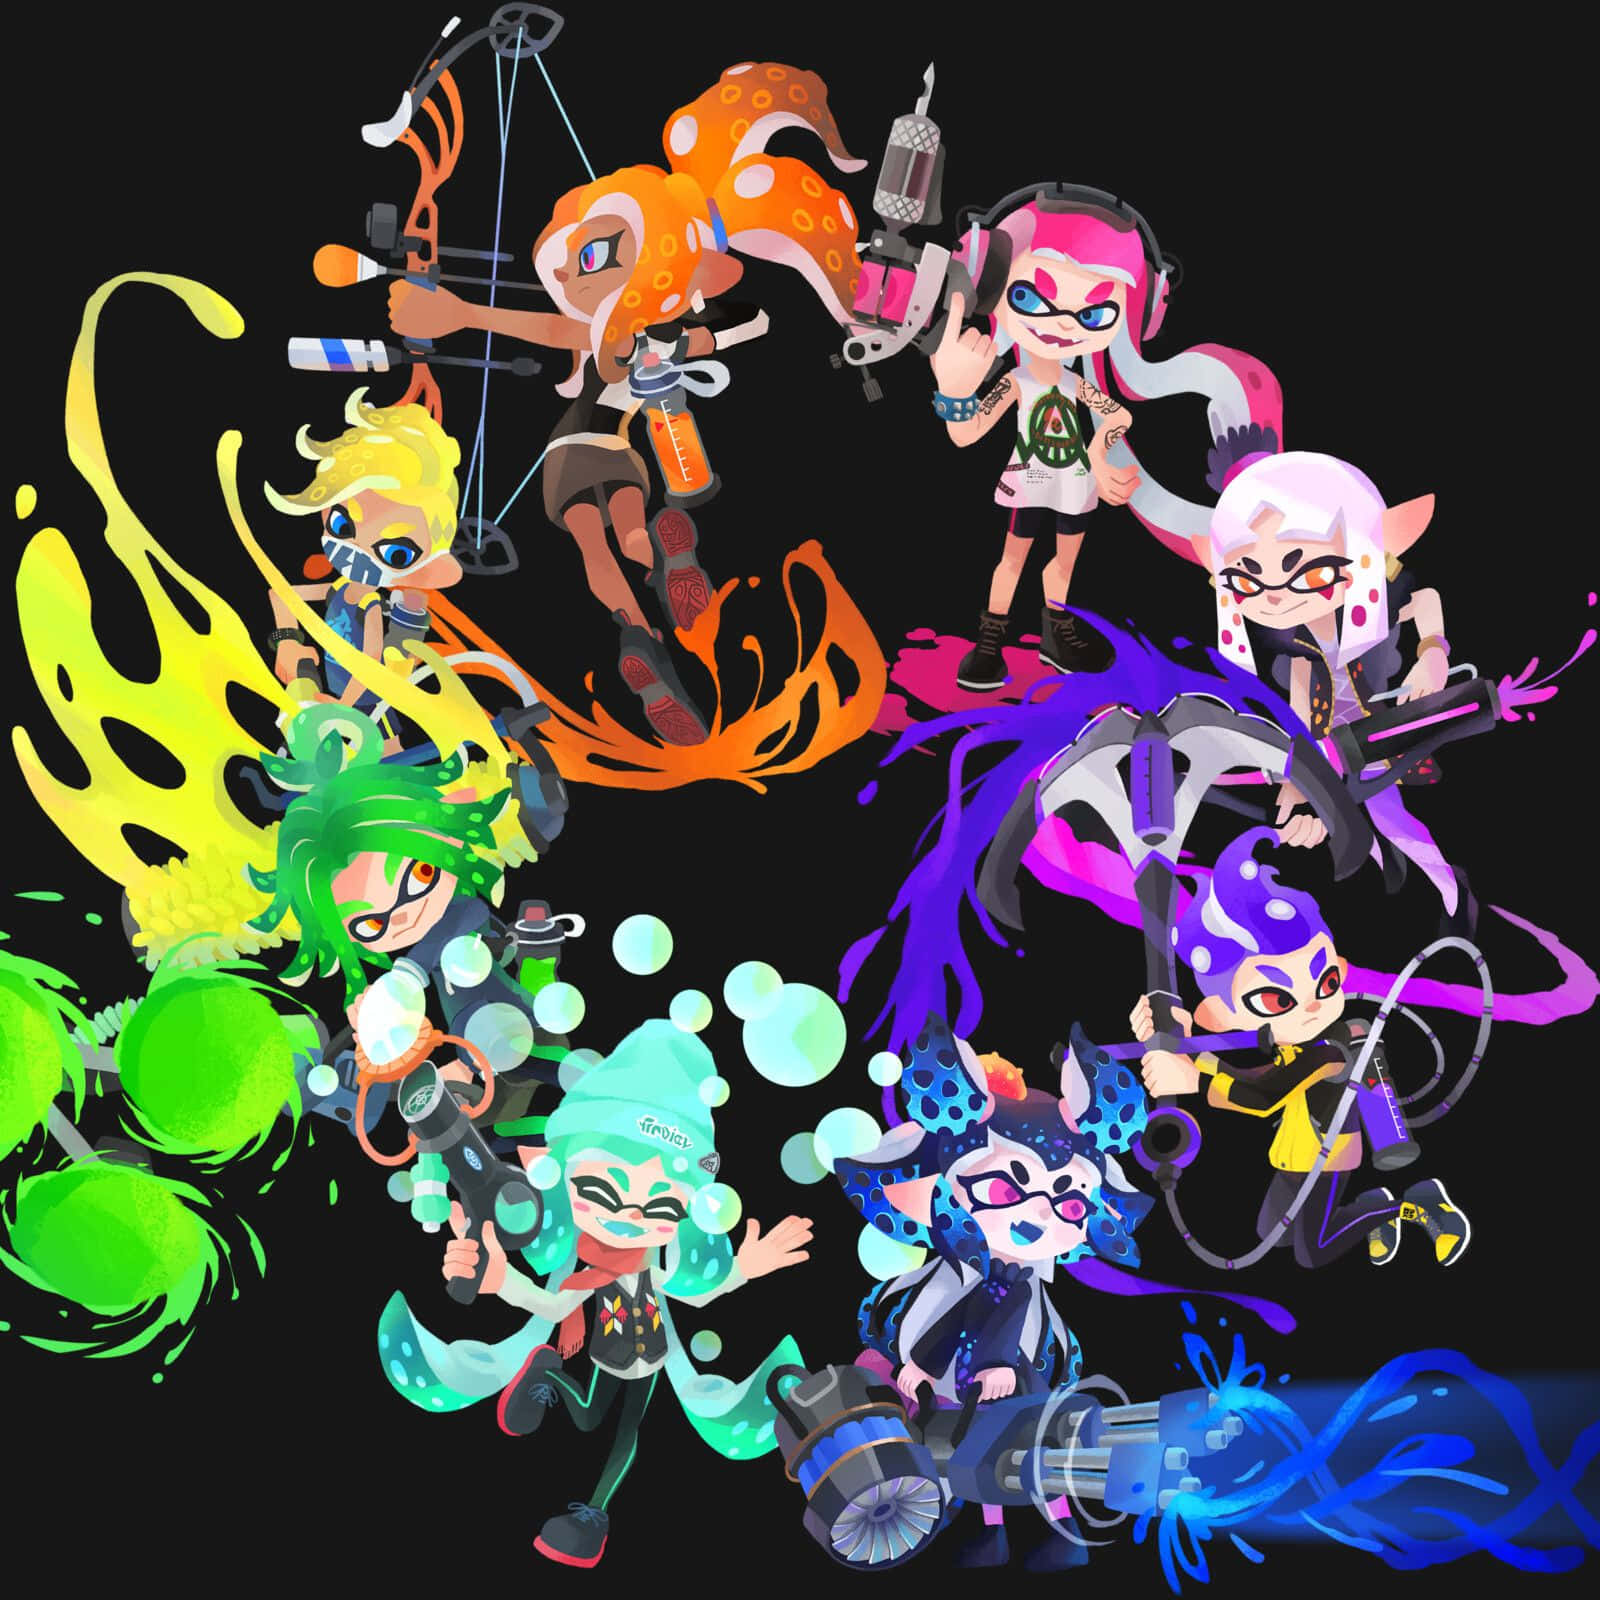 Join Us in a Colorful Splatoon Battle!